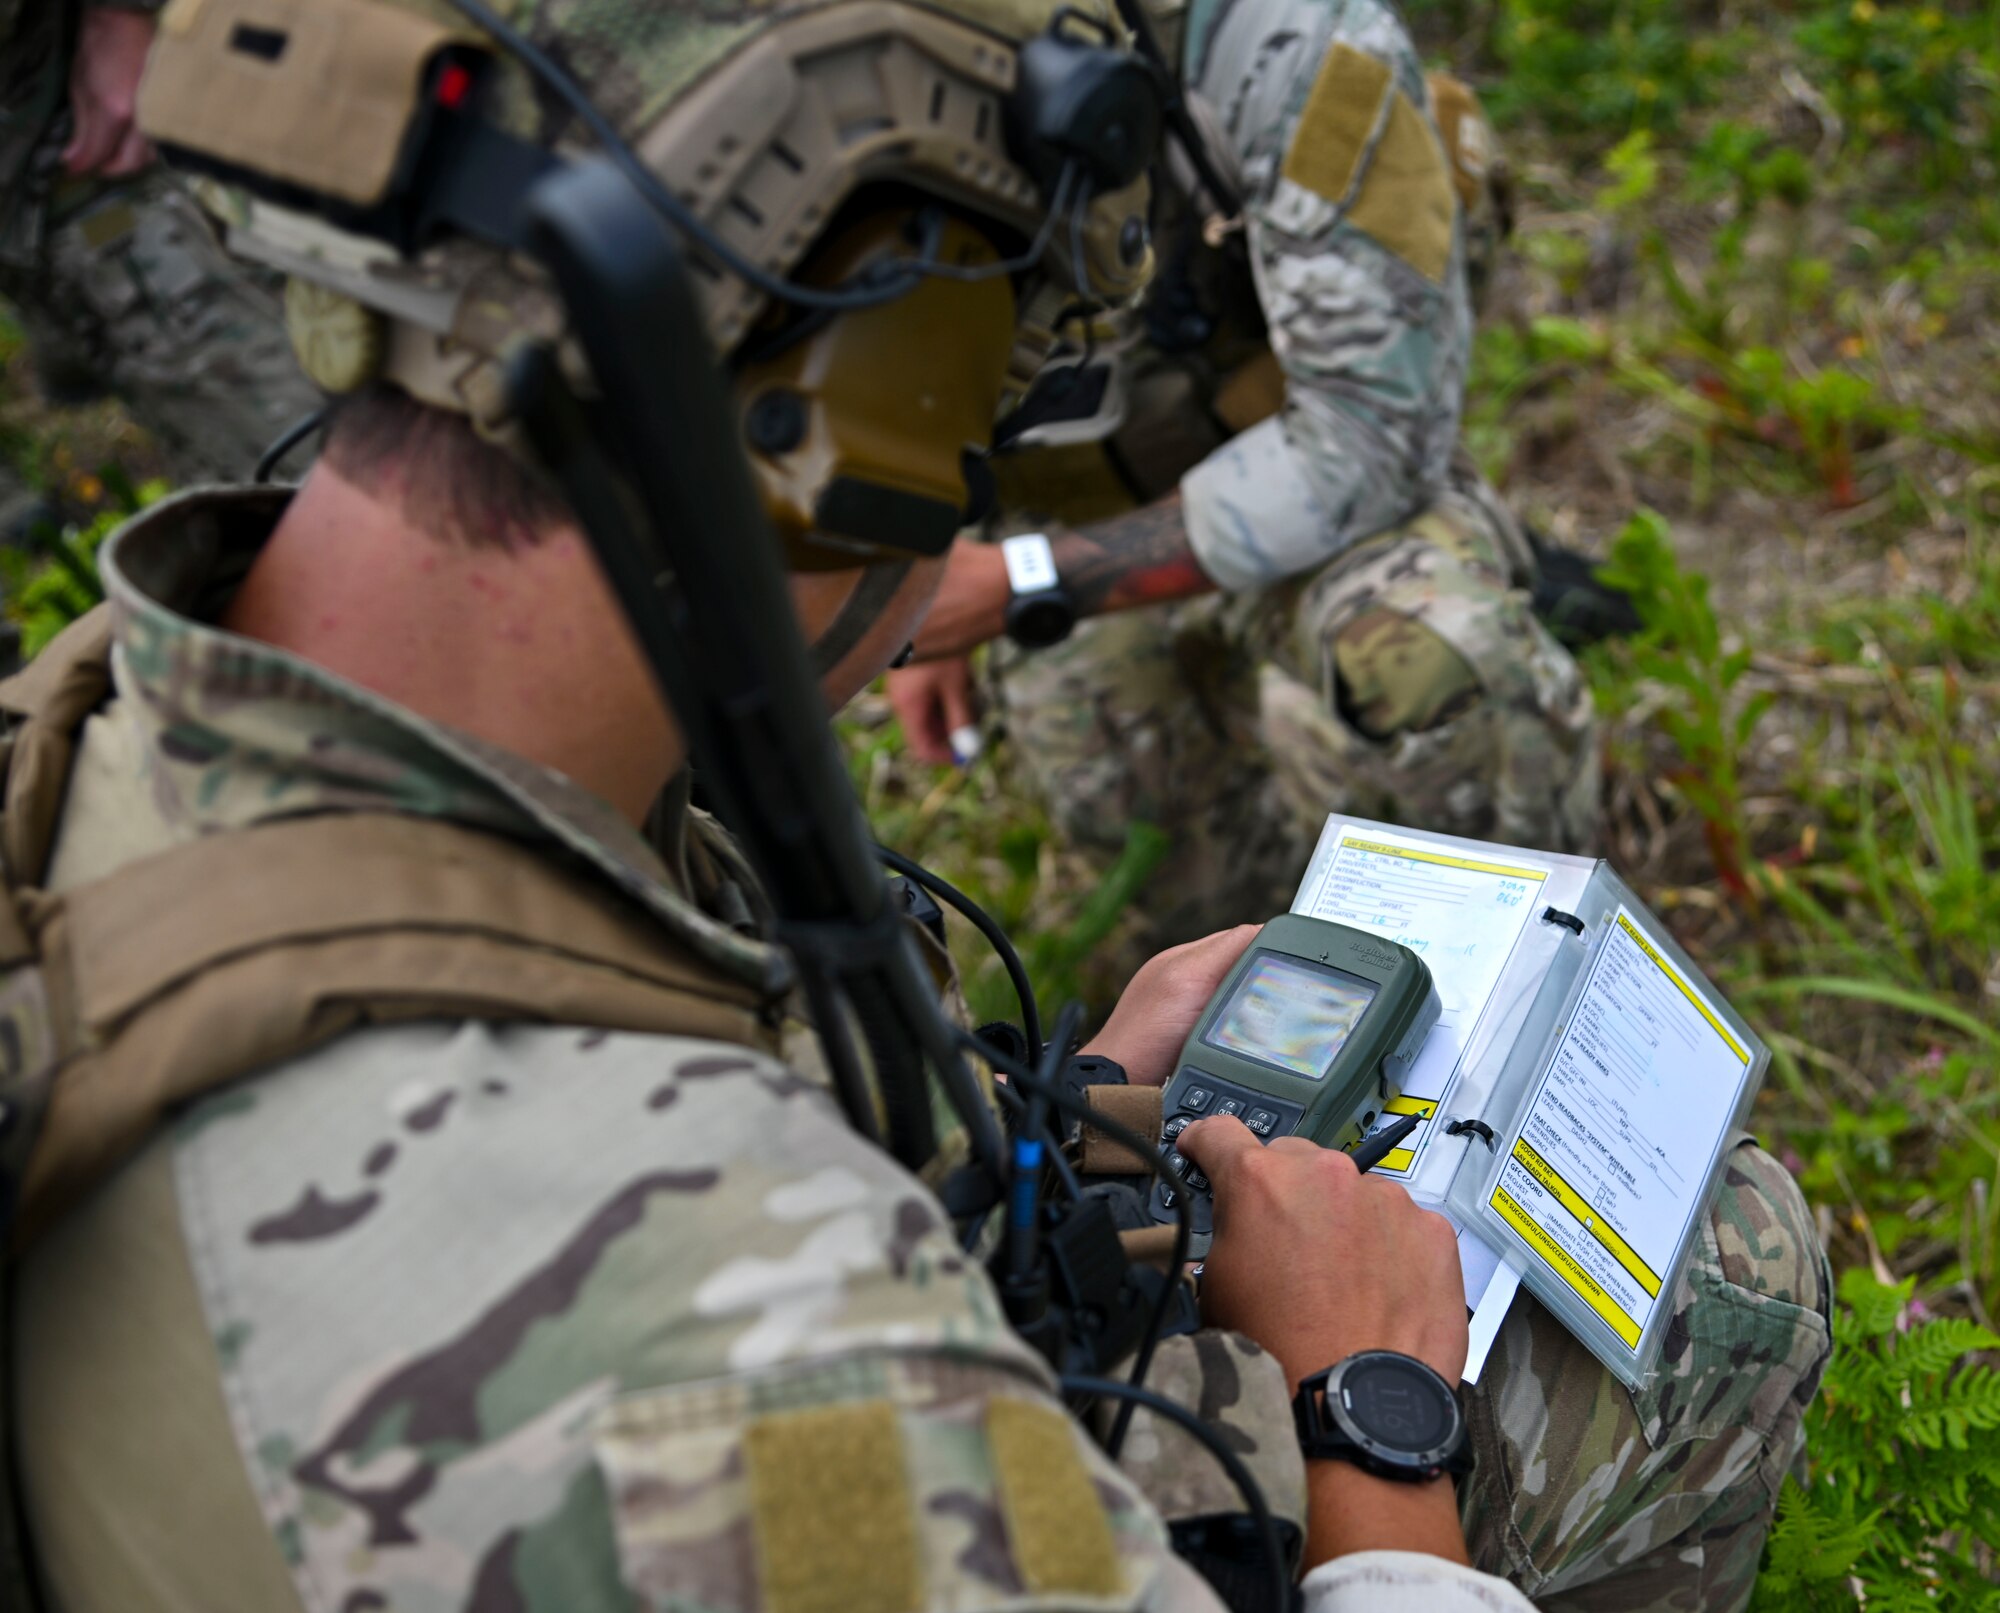 A U.S. Air Force joint terminal attack controller assigned to the 320th Special Tactics Squadron fills in information for a 9-line at Draughon Range, near Misawa Air Base, Japan, June 15, 2020. A 9-line is a standardized format in which a JTAC gives targeting information to aircraft pilots. Brandt and other JTACS from the 320th STS came to Draughon Range to maintain their currency as combat controllers. (U.S. Air Force photo by Tech. Sgt. Timothy Moore)